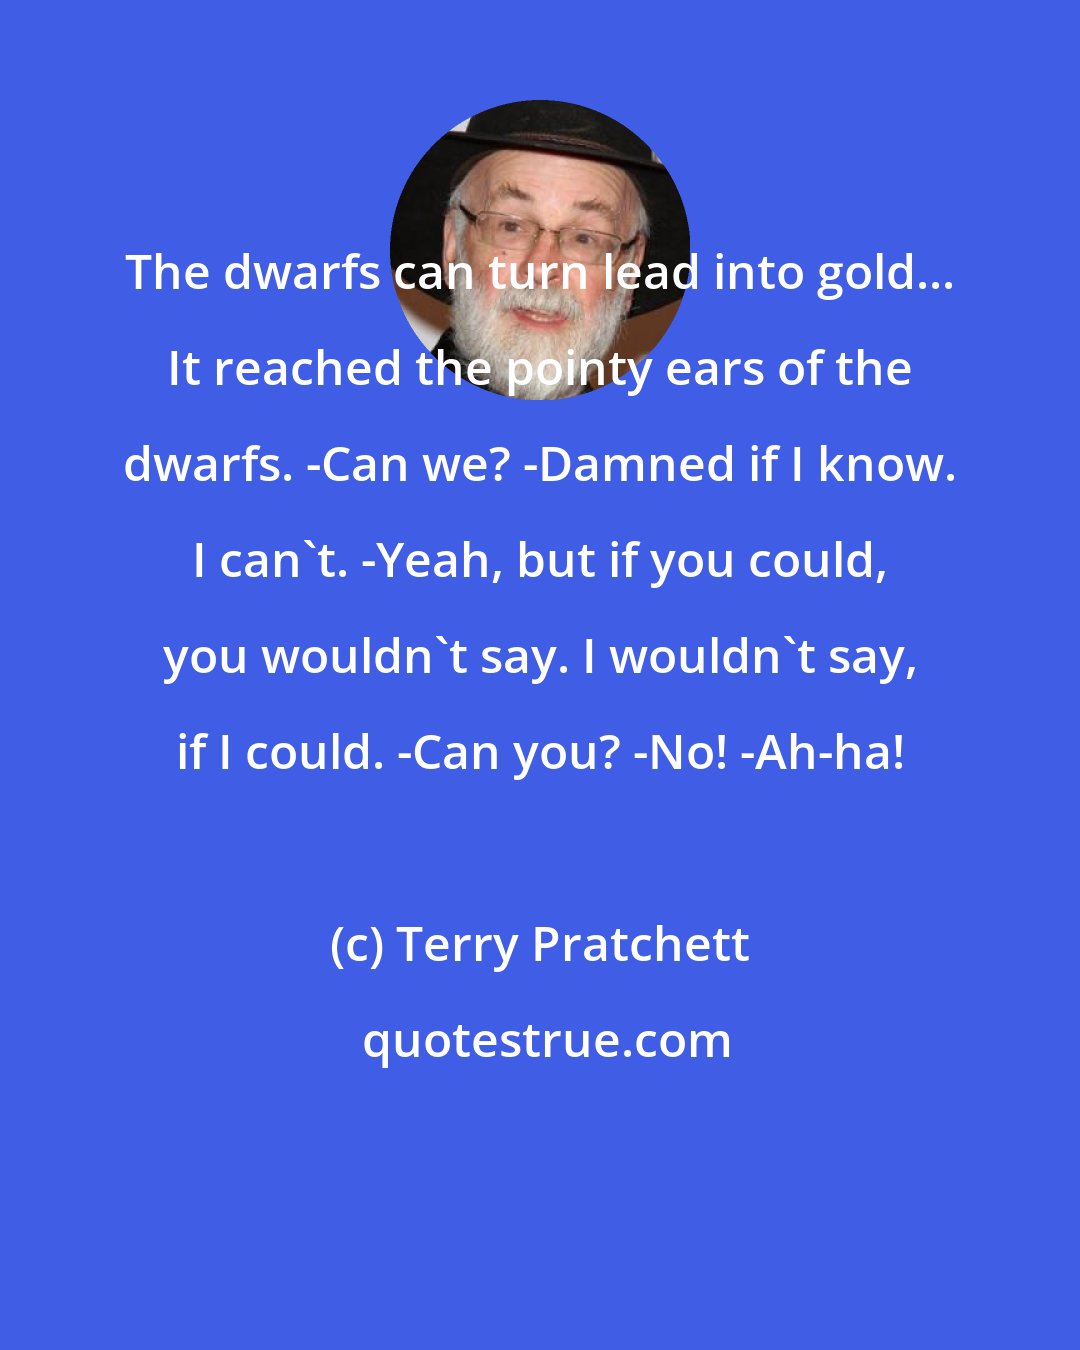 Terry Pratchett: The dwarfs can turn lead into gold... It reached the pointy ears of the dwarfs. -Can we? -Damned if I know. I can't. -Yeah, but if you could, you wouldn't say. I wouldn't say, if I could. -Can you? -No! -Ah-ha!